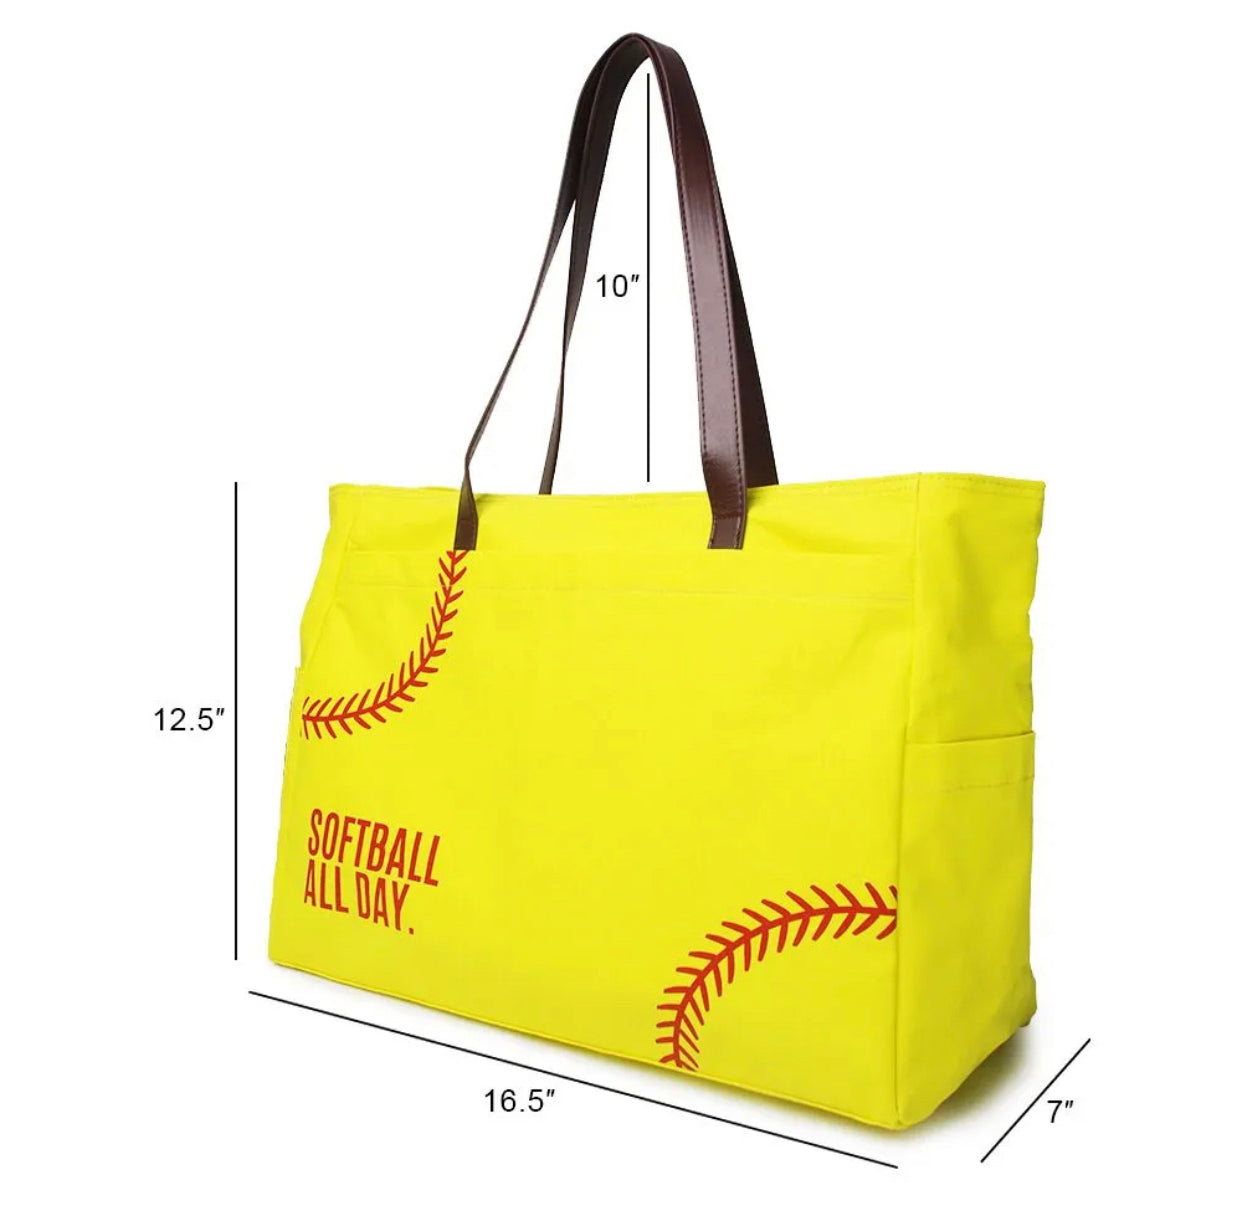 The Baseball/Softball Canvas Tote - All Day